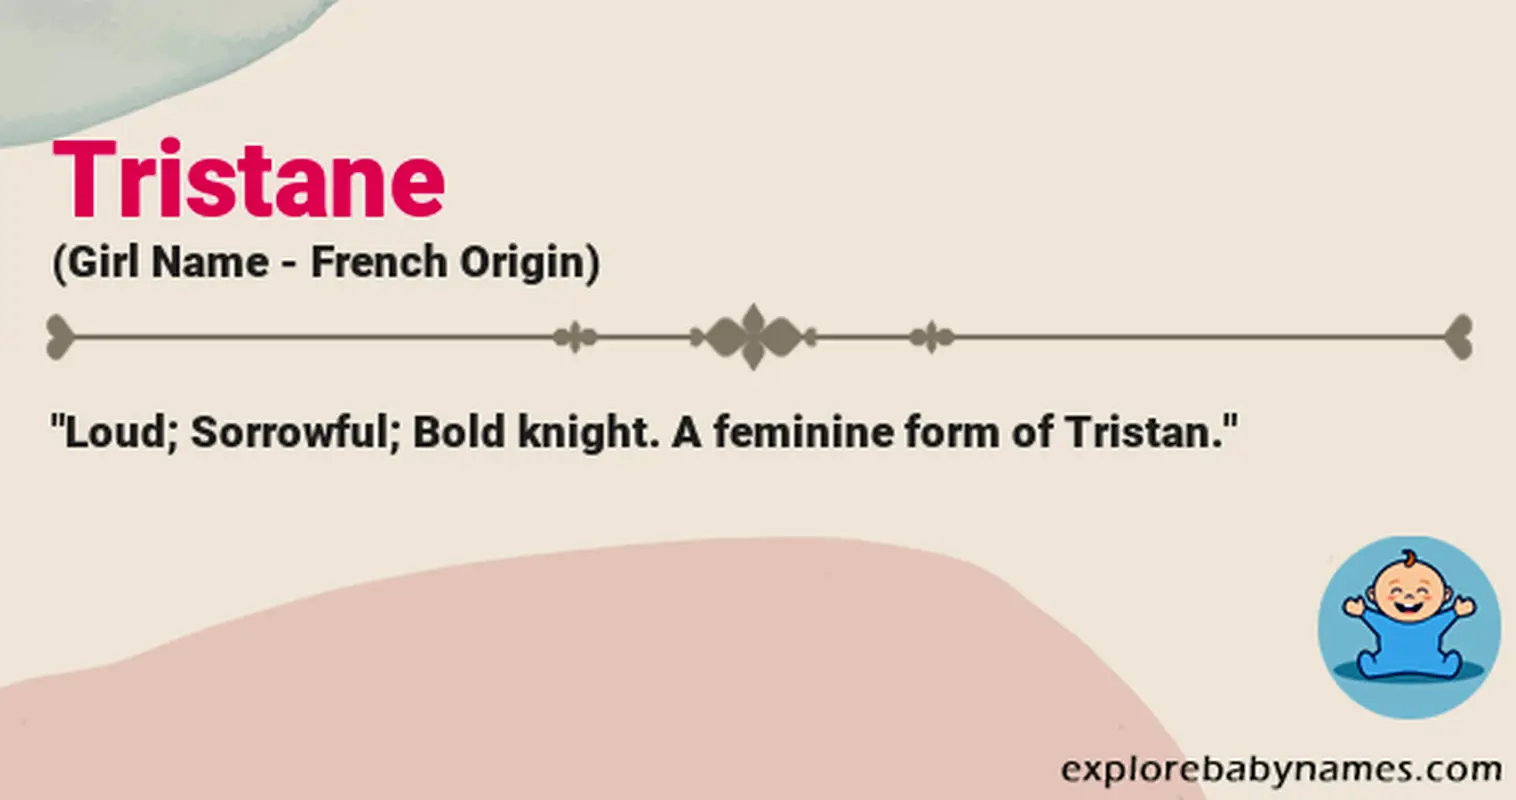 Meaning of Tristane